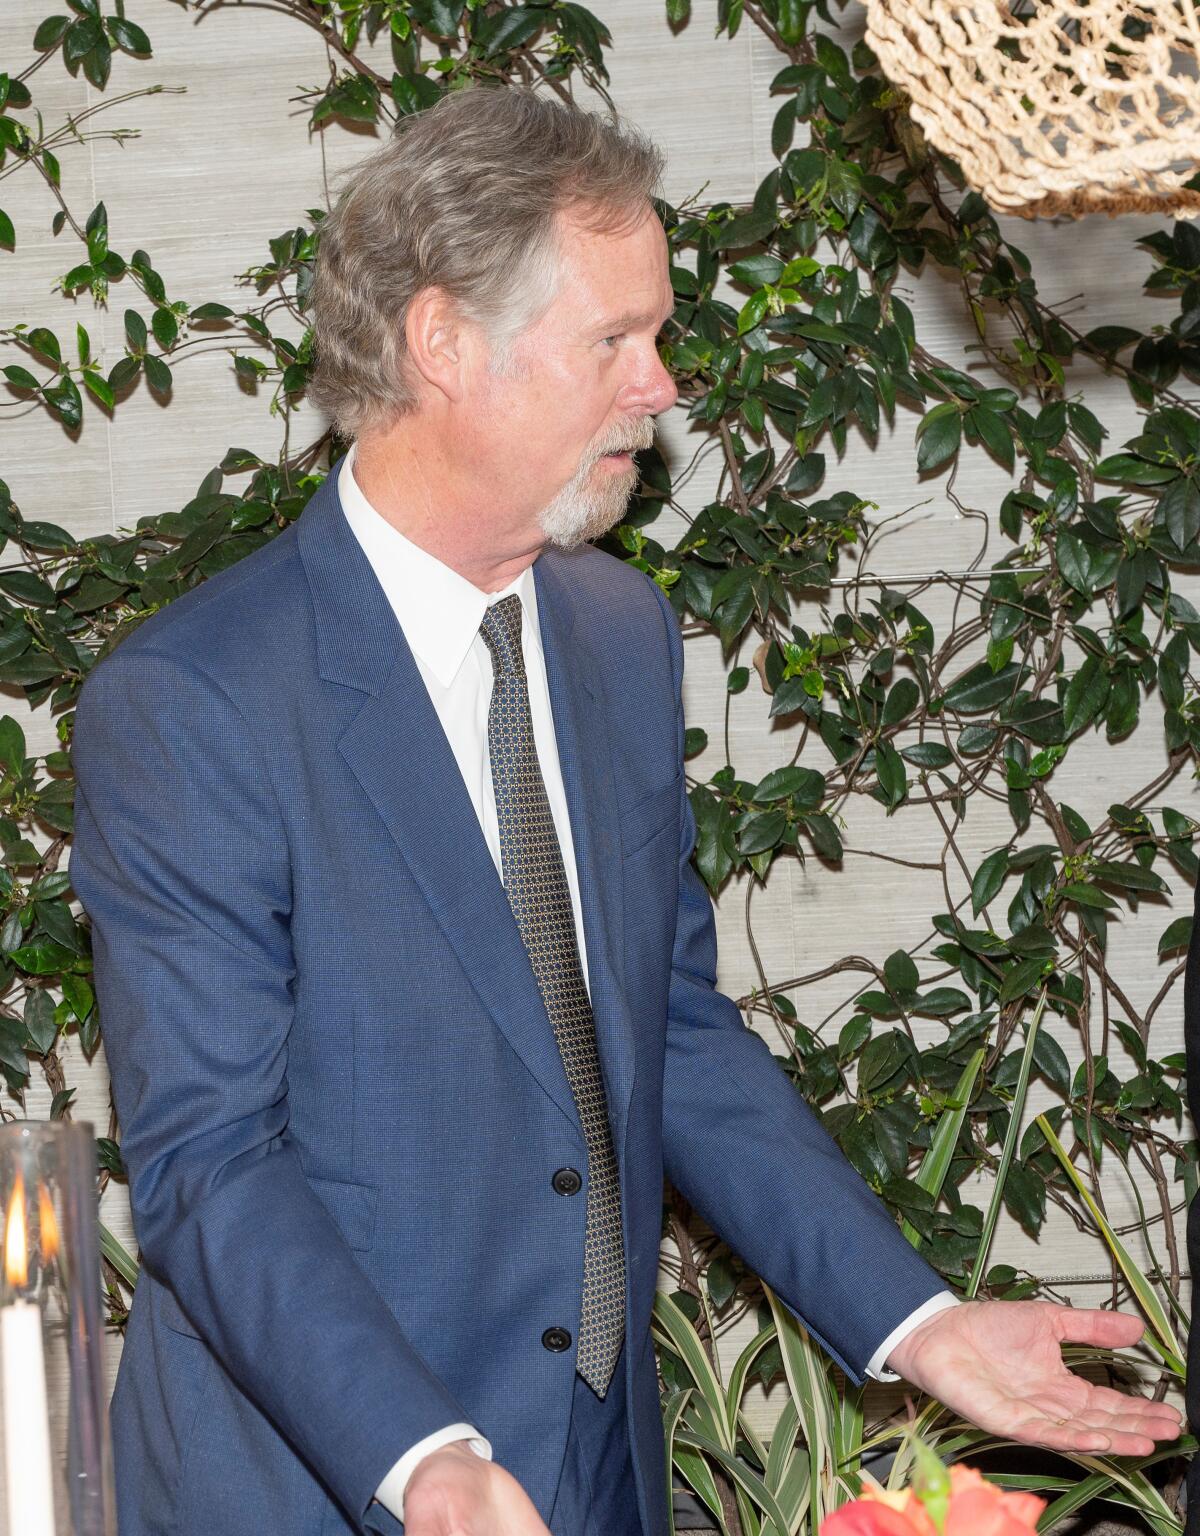 Anton Segerstrom, Partner, South Coast Plaza welcomes guests at 55th Anniversary dinner held at Knife Pleat, SCP.